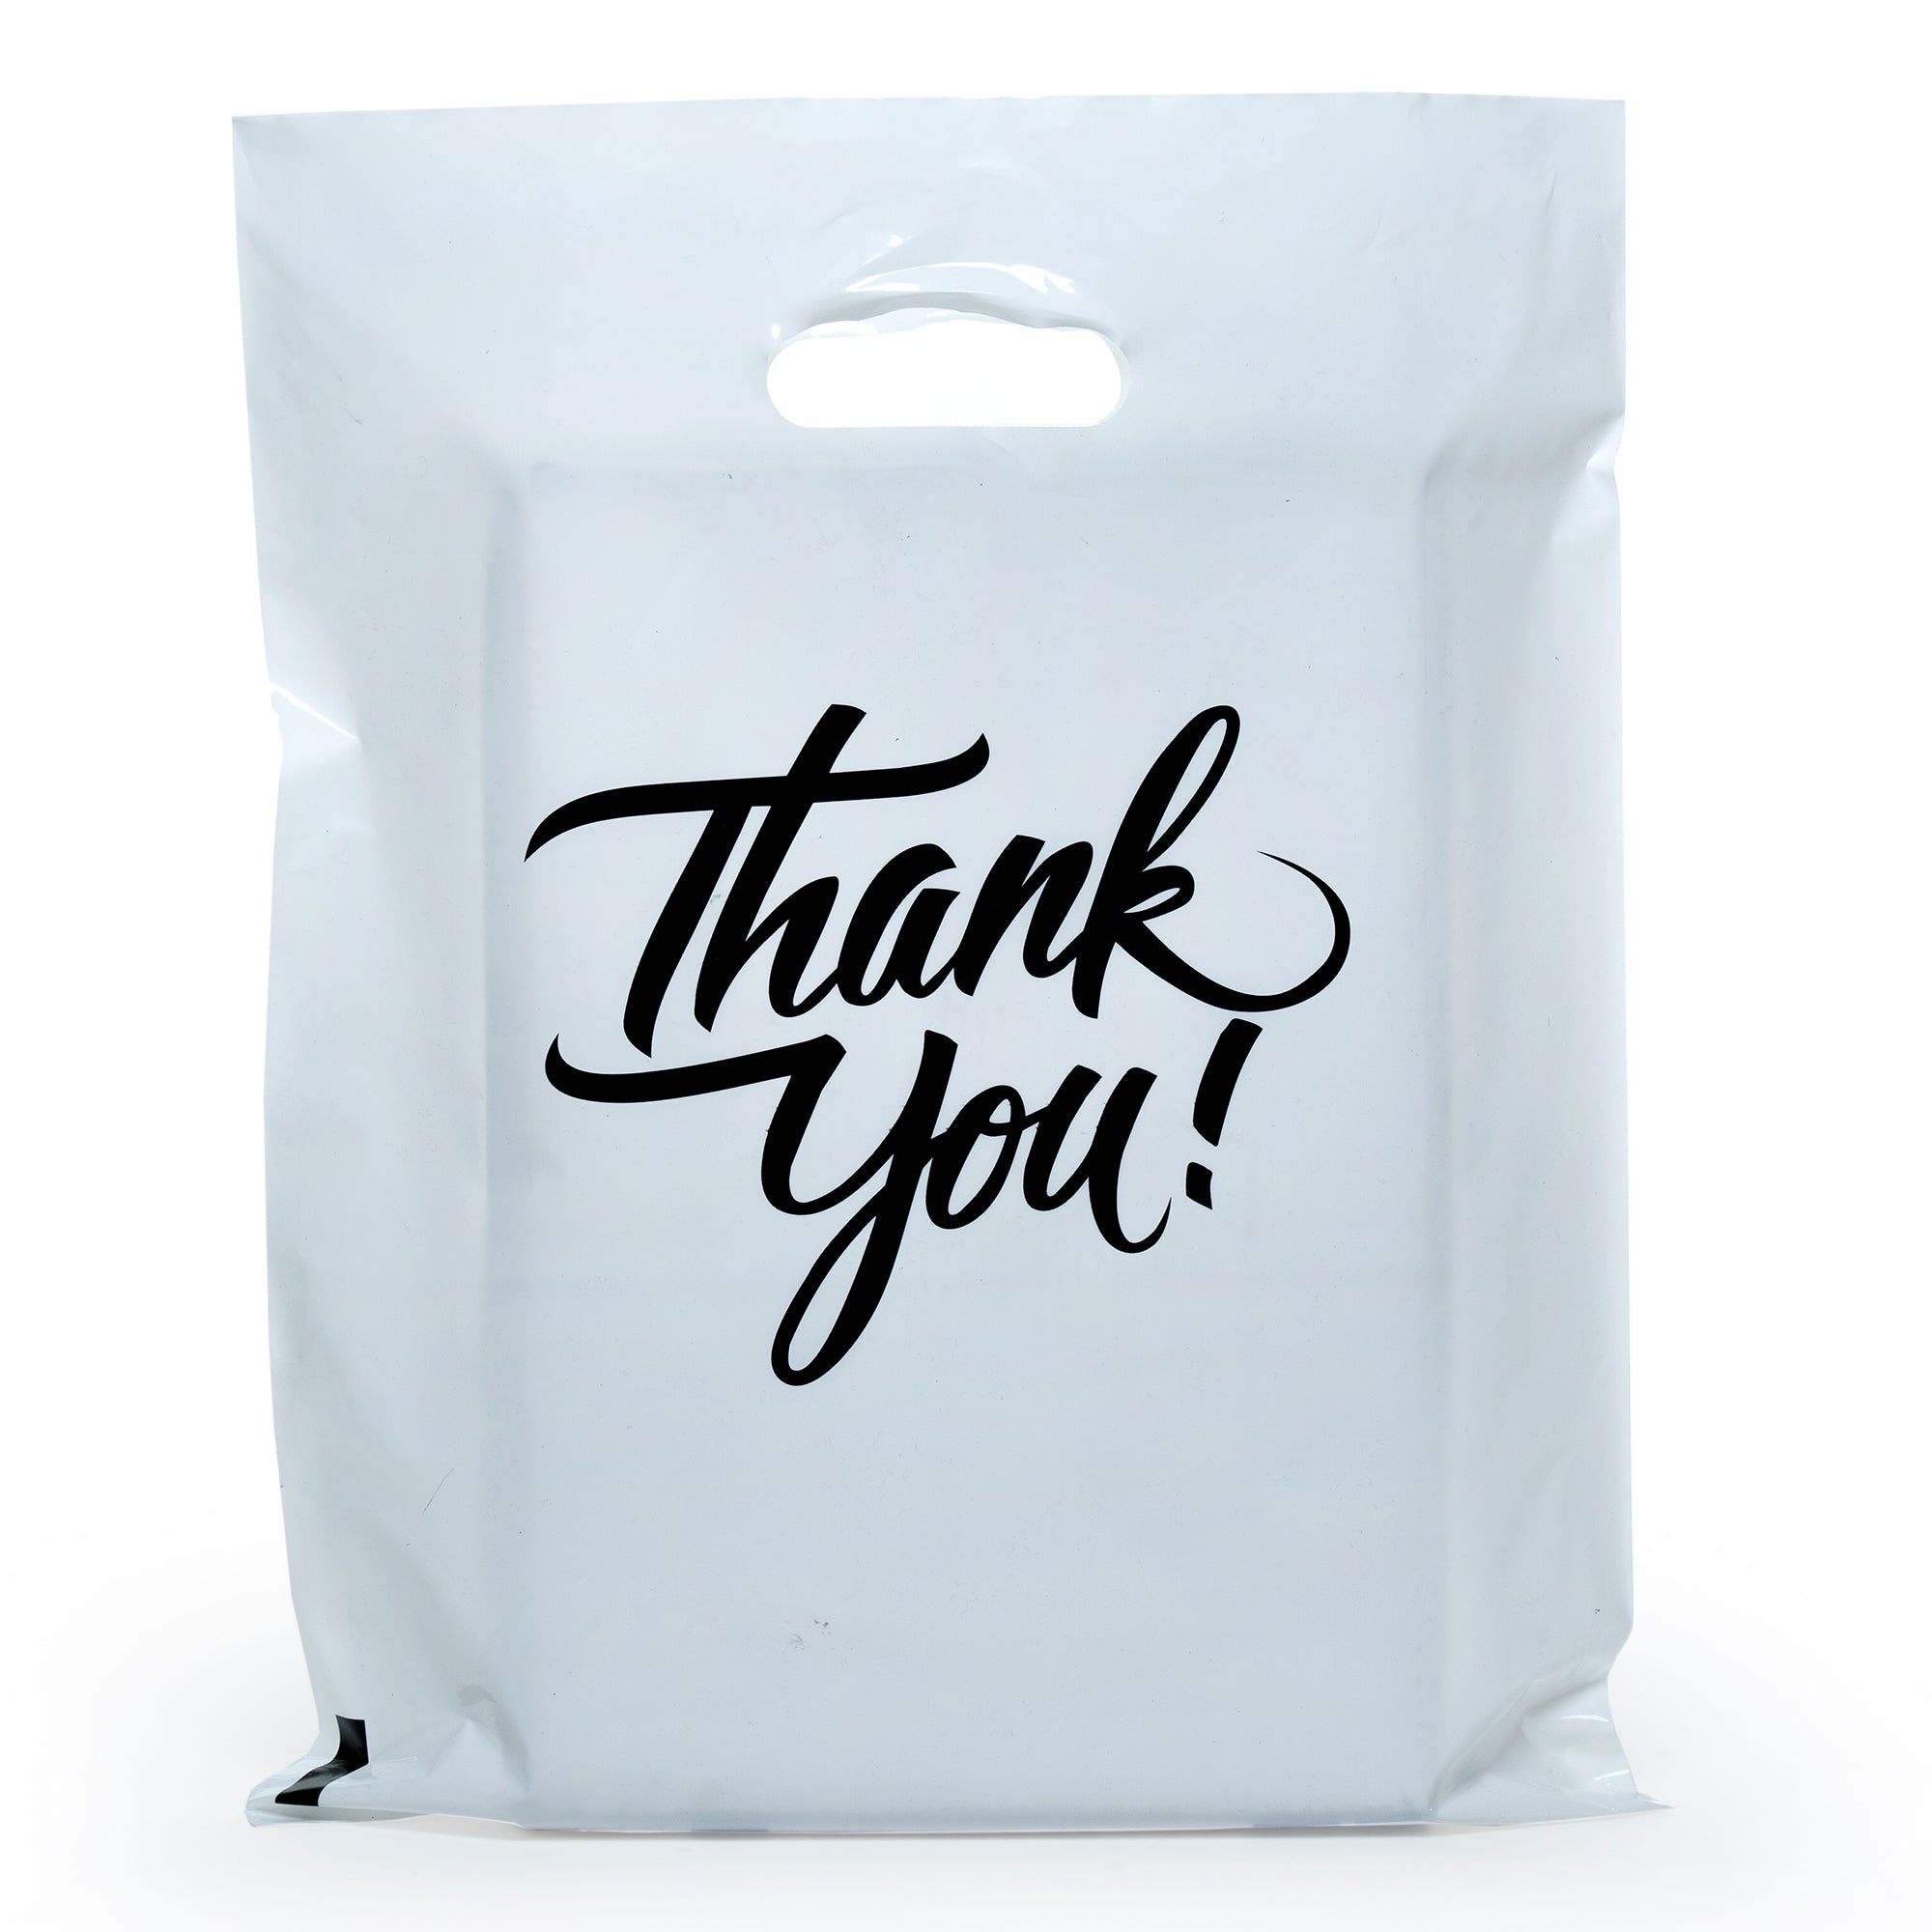 Sweetude 200 Pcs Thank You Plastic Shopping Bags for Small Business Bulk  12x15In Xmas Boutique Bags with Handle Gold Loop(Black)